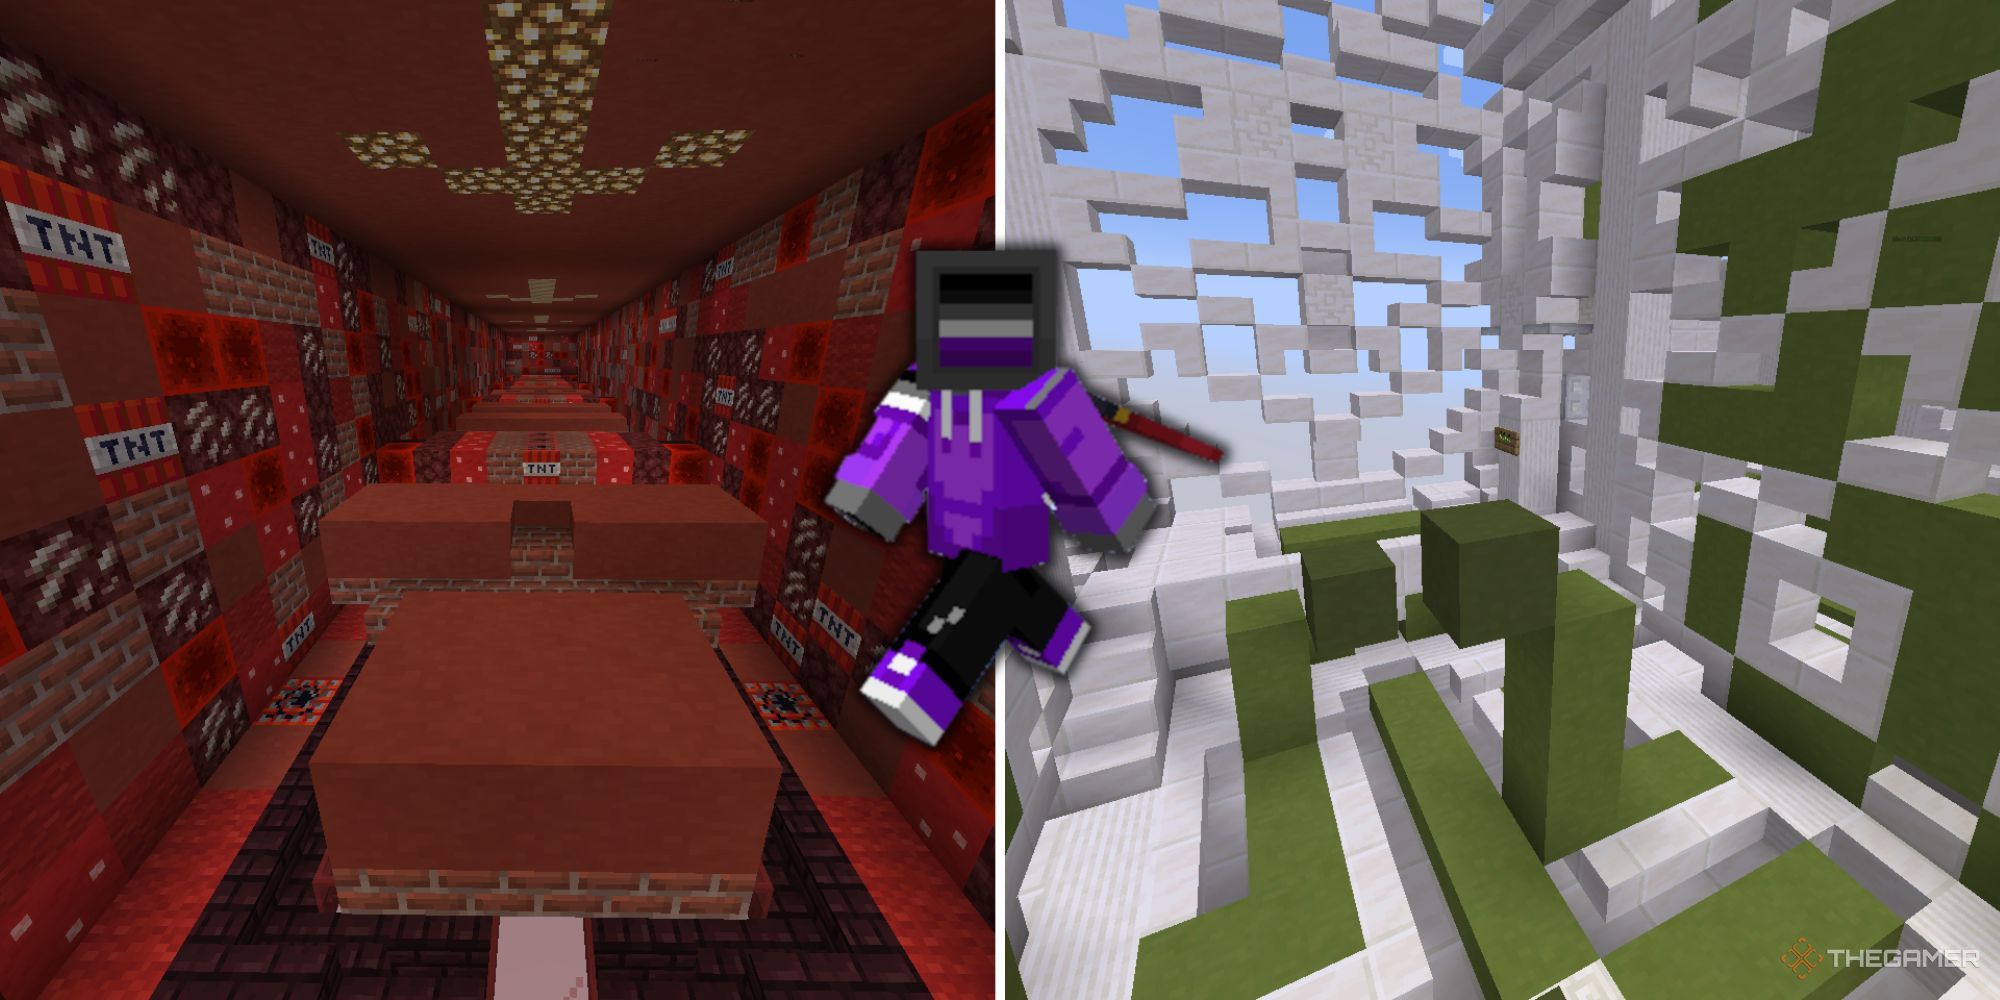 Minecraft a character overlayed on top of a split image showing a red parkour course and a green and white parkour course